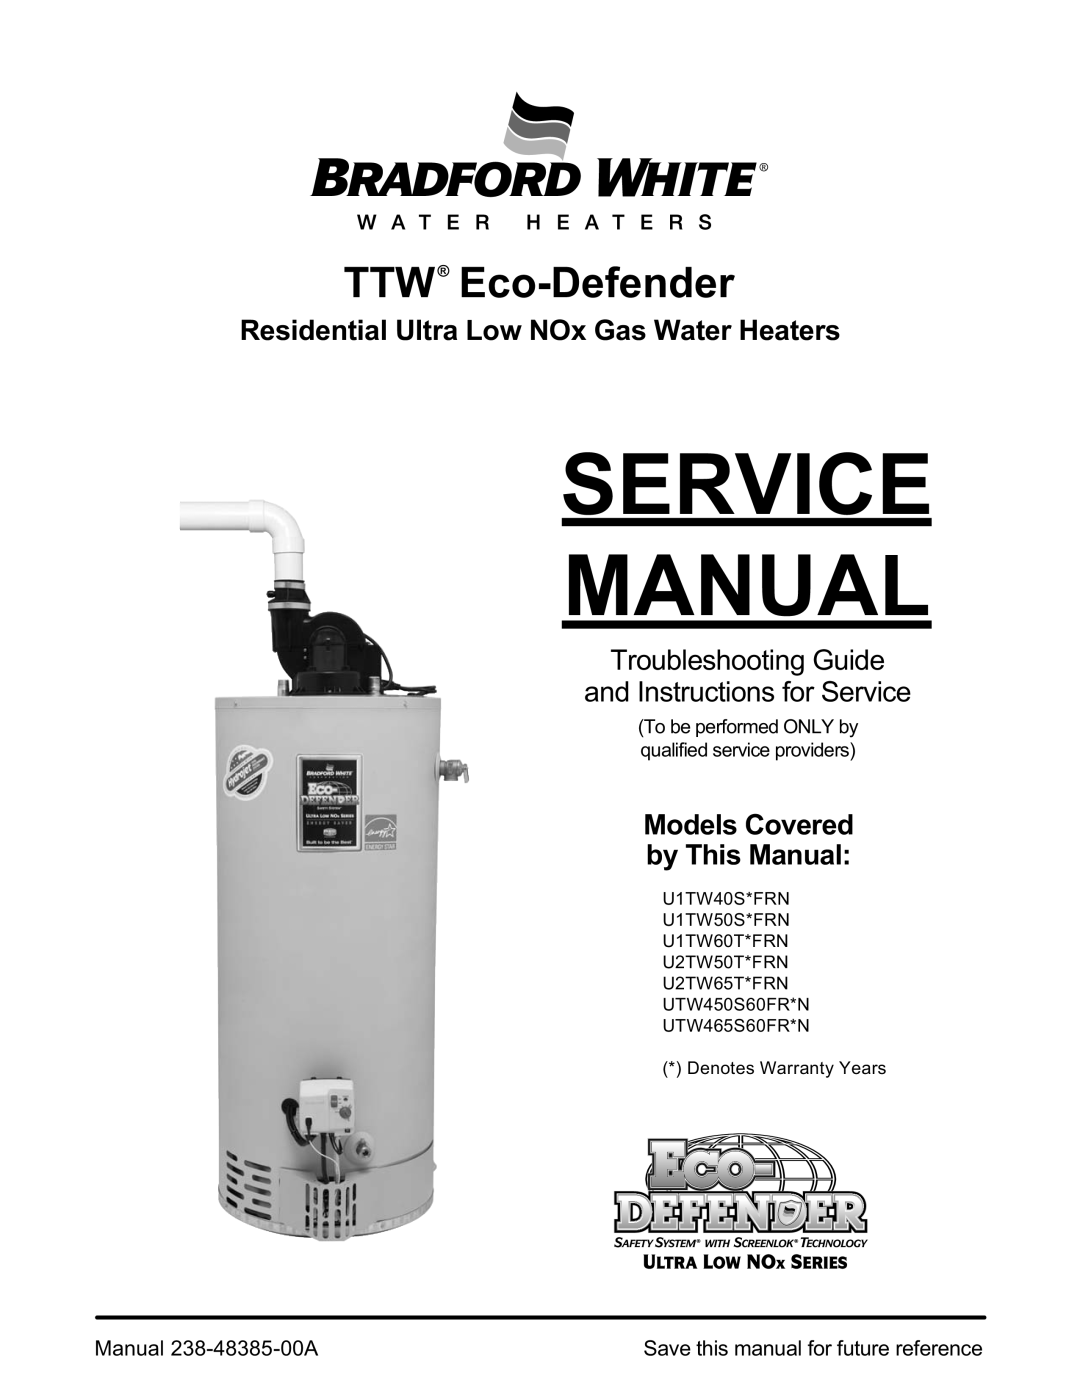 Bradford-White Corp UTW465S60FR*N service manual Service Manual, TTW Eco-Defender, Models Covered by This Manual 